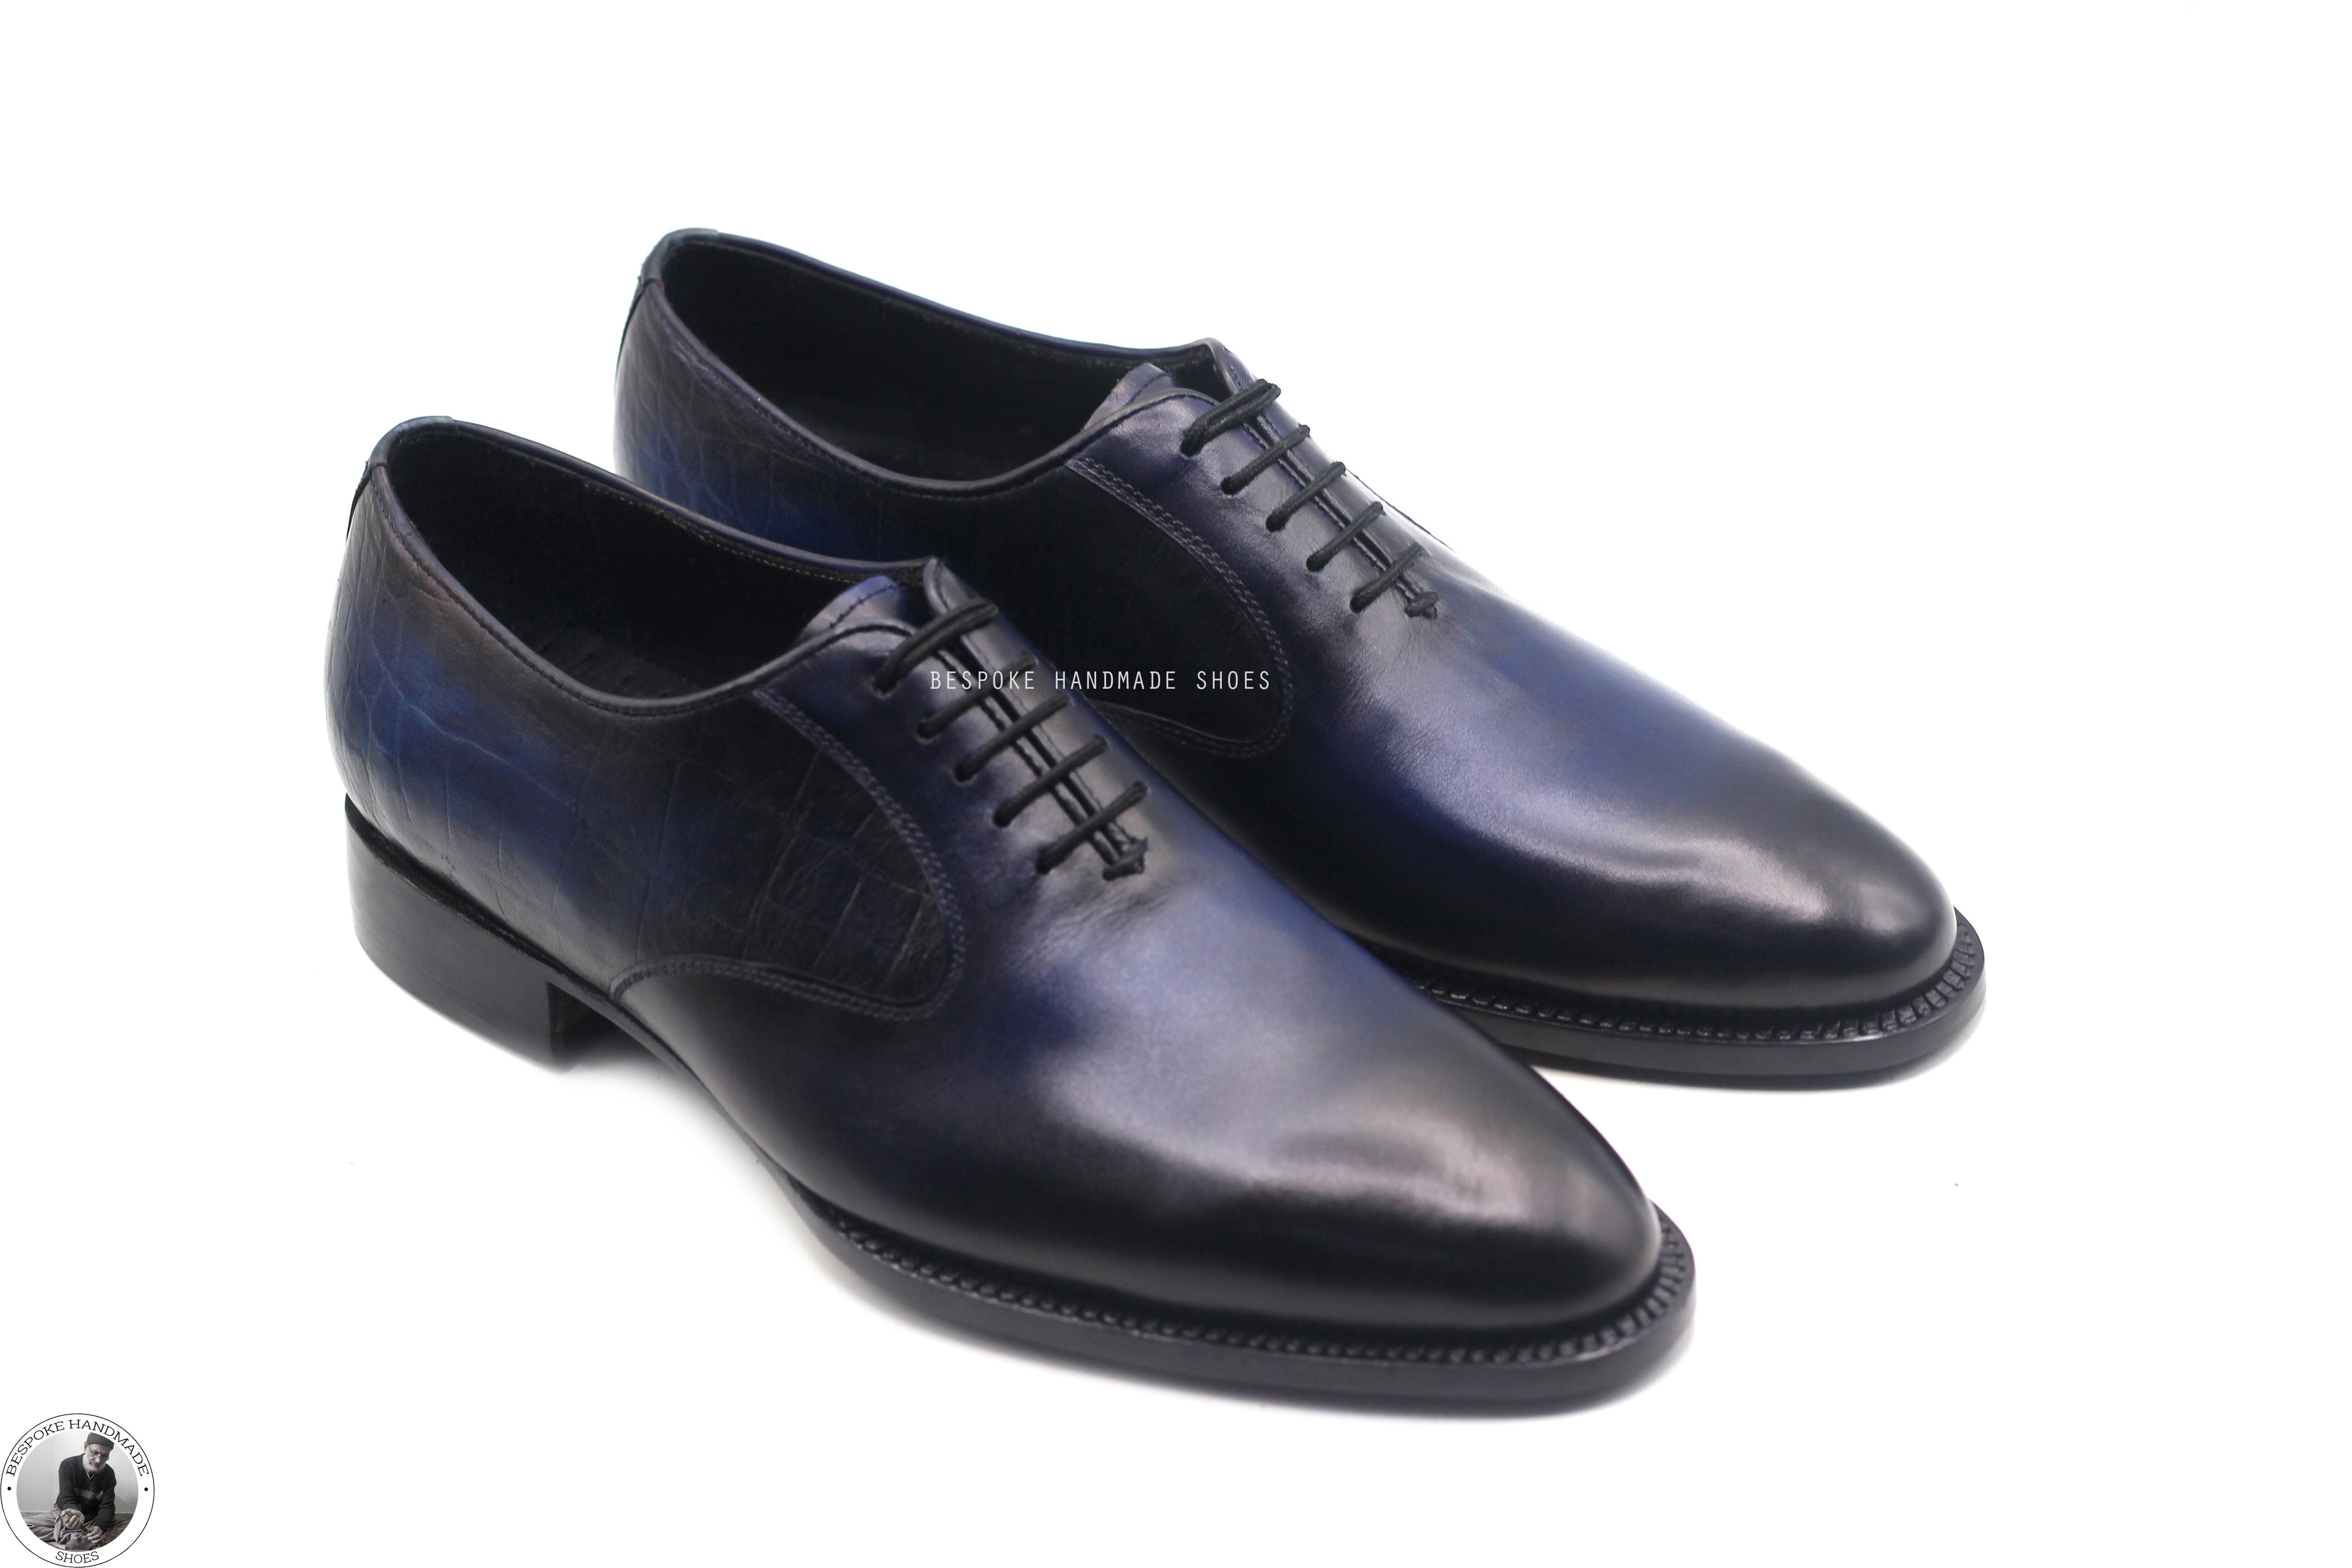 New Men's Handmade Two Tone Blue Leather, Black Shaded Lace Up Oxford Whole Cut Party Shoes Men's